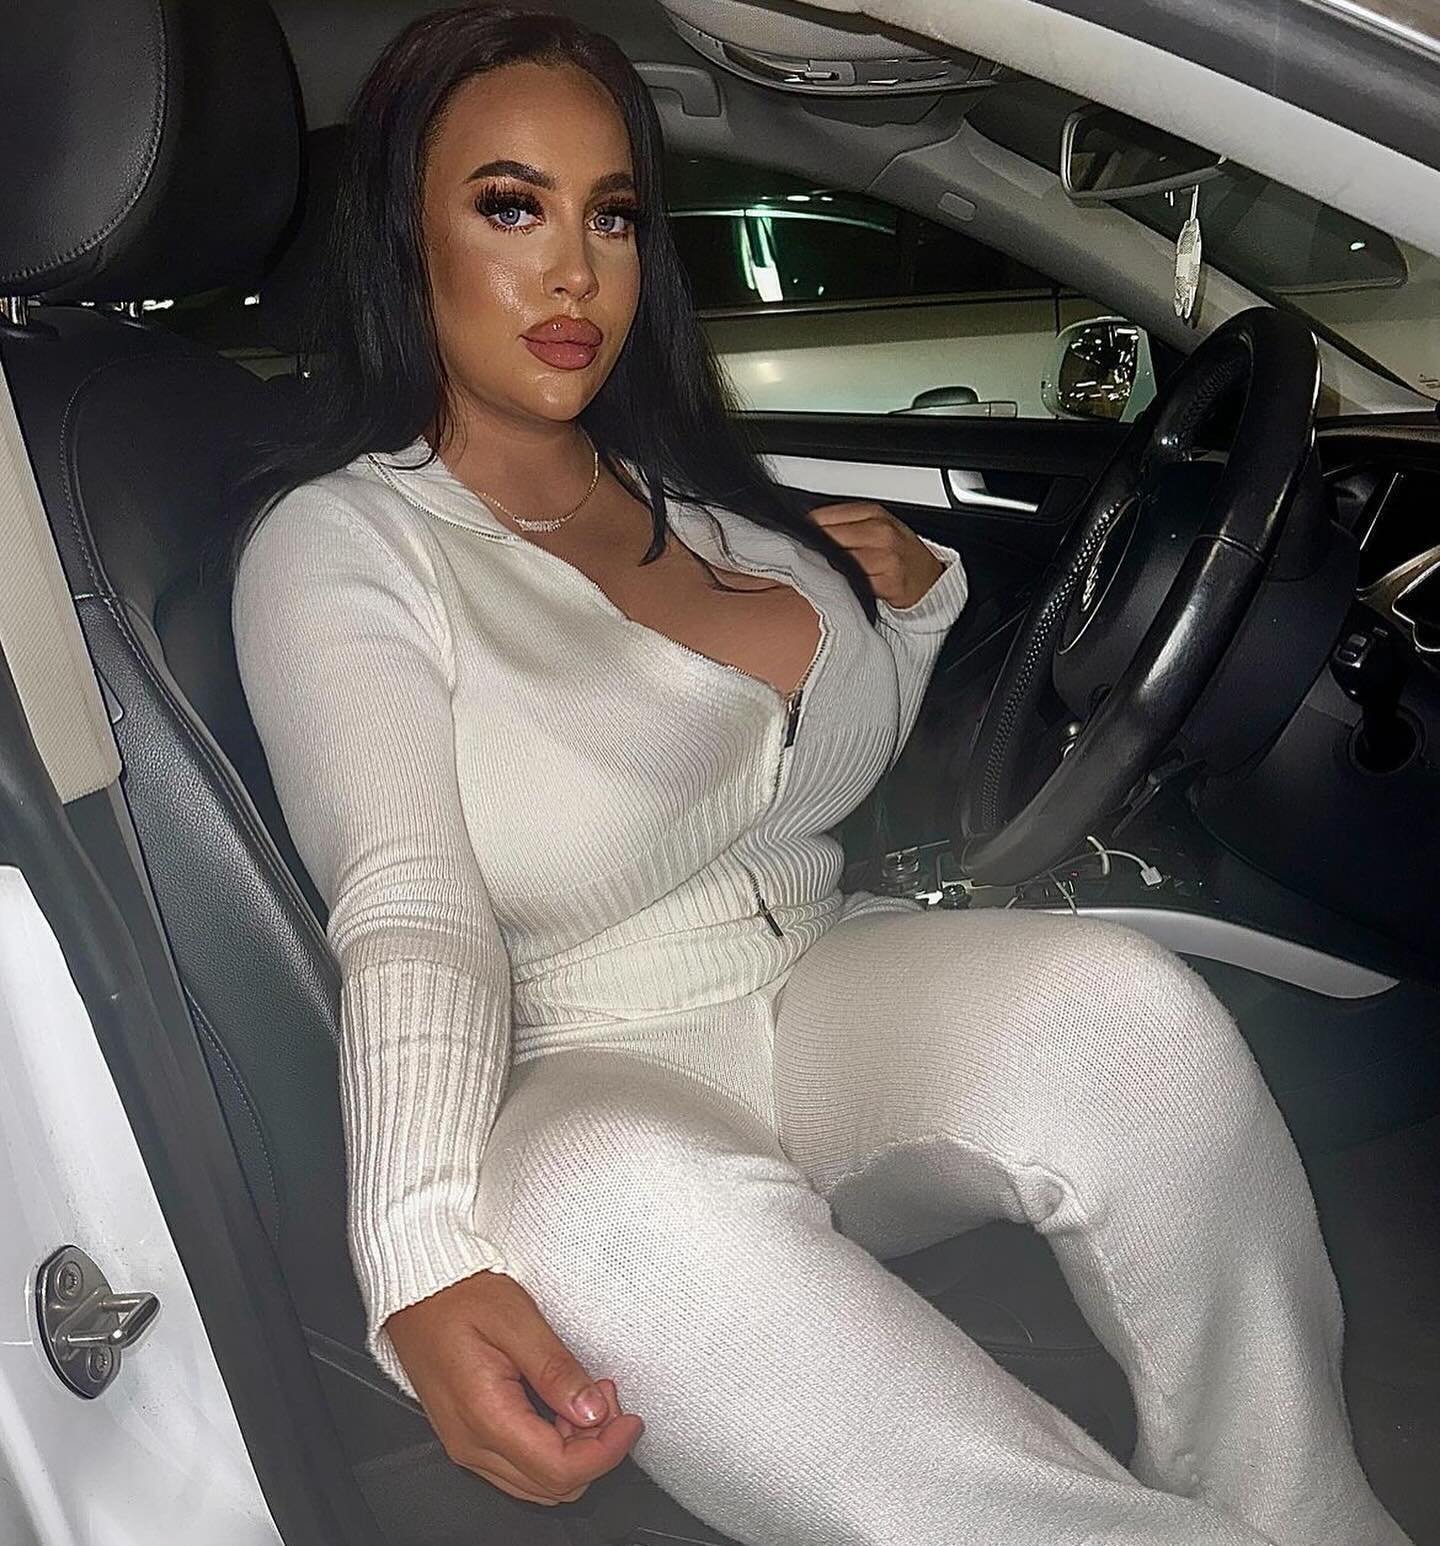 @brookeharman_ 
&ldquo;Introducing the fabulous Brooke-Ella Harman, the ultimate fashion influencer and Fashion Nova ambassador! With her impeccable style, glamorous looks, and stunning presence, Brooke-Ella is setting trends and turning heads wherev